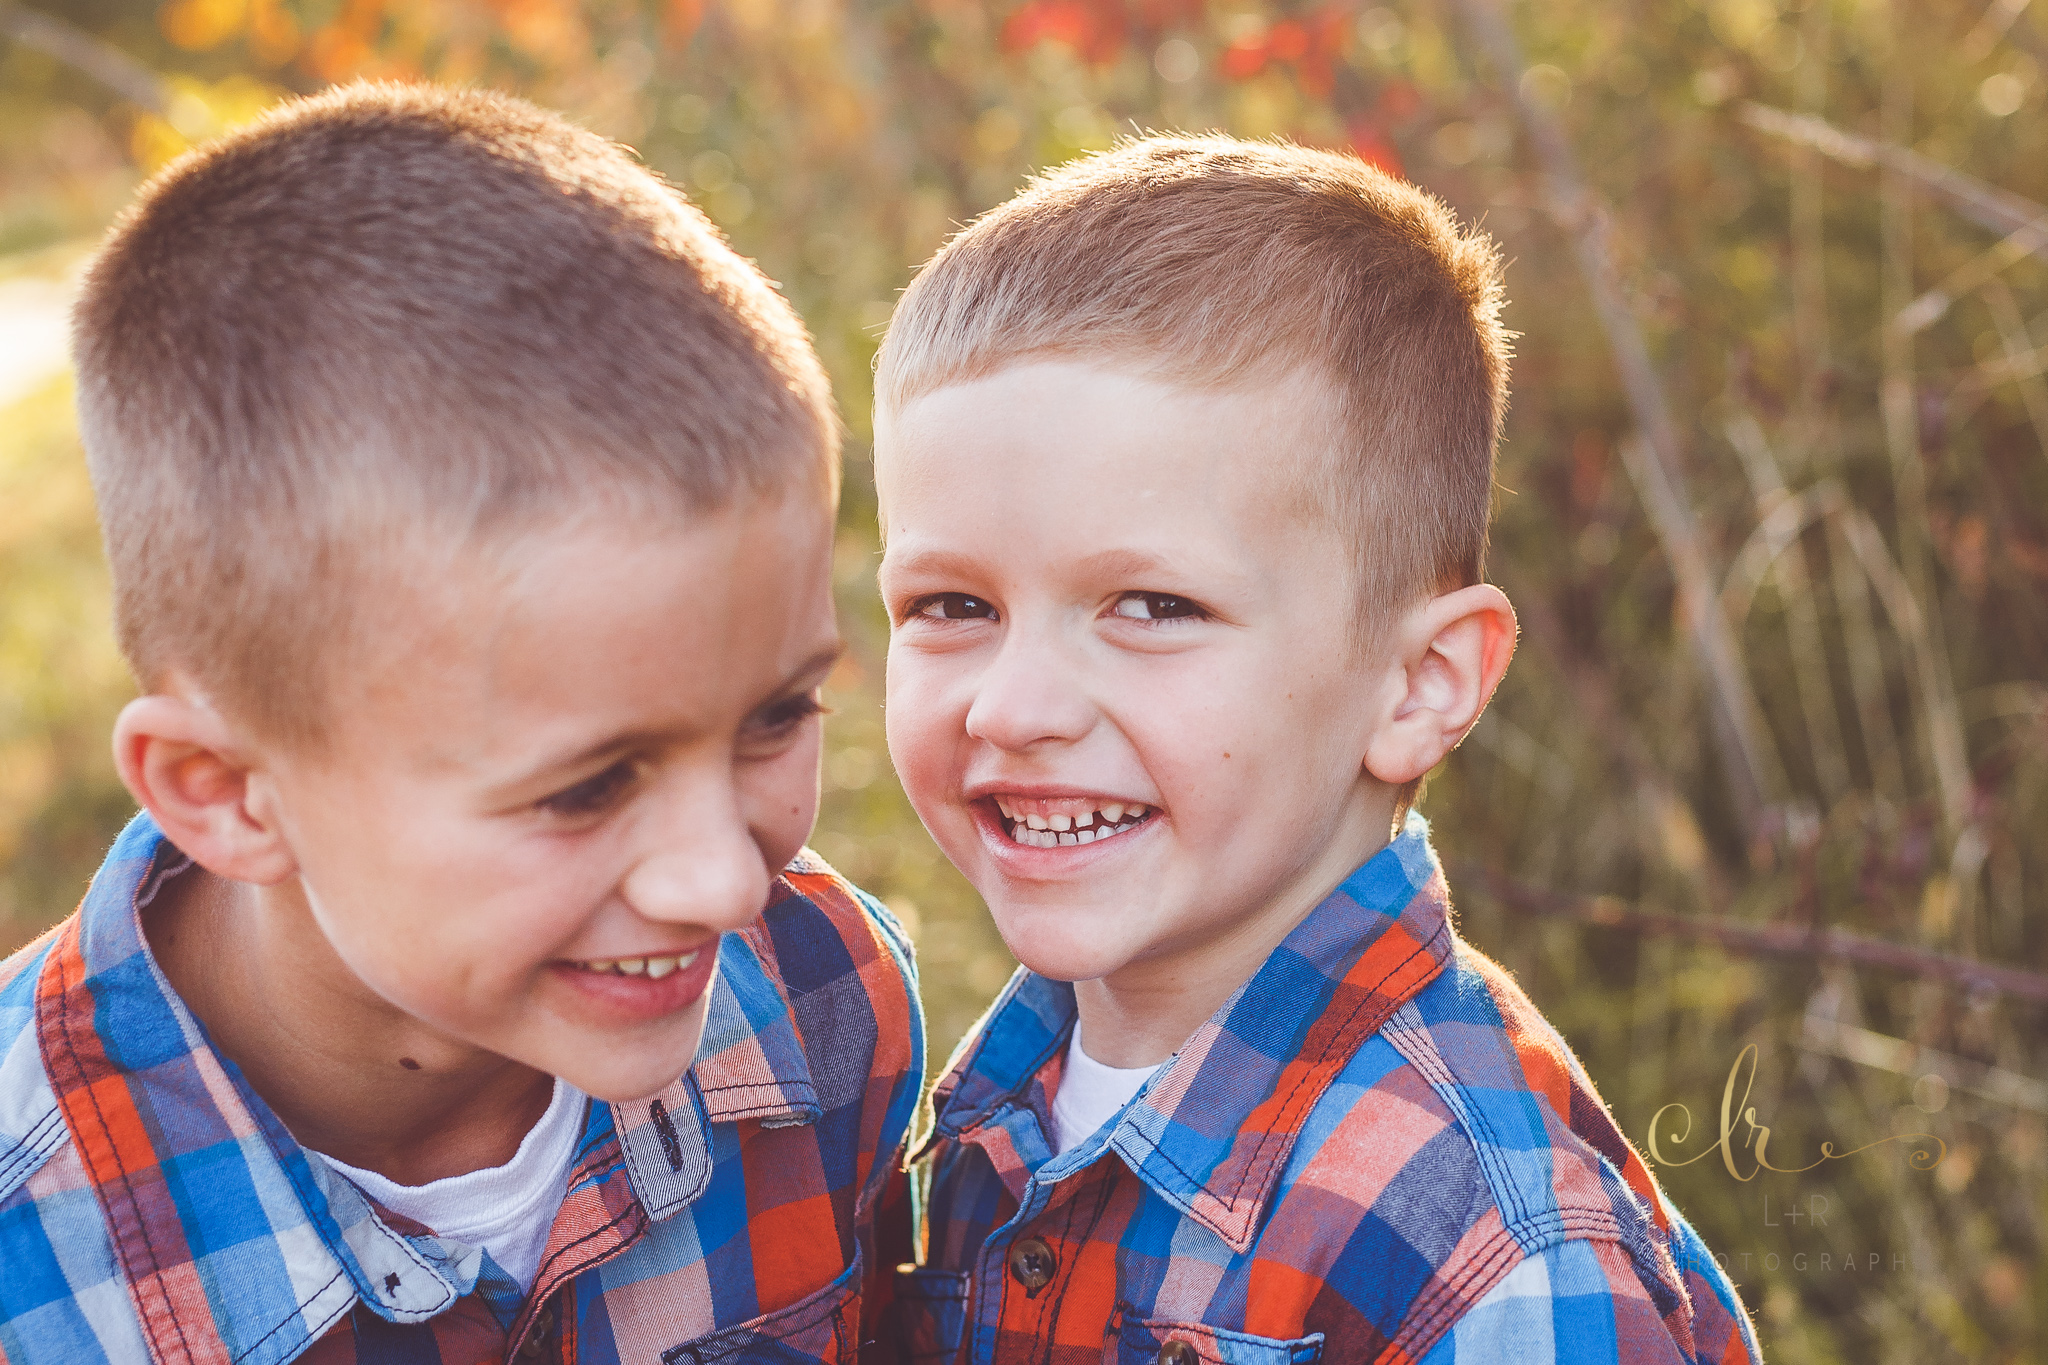 Two young brothers, share a laugh and smile during their family photography session by L&R Photography in Tulsa, OK